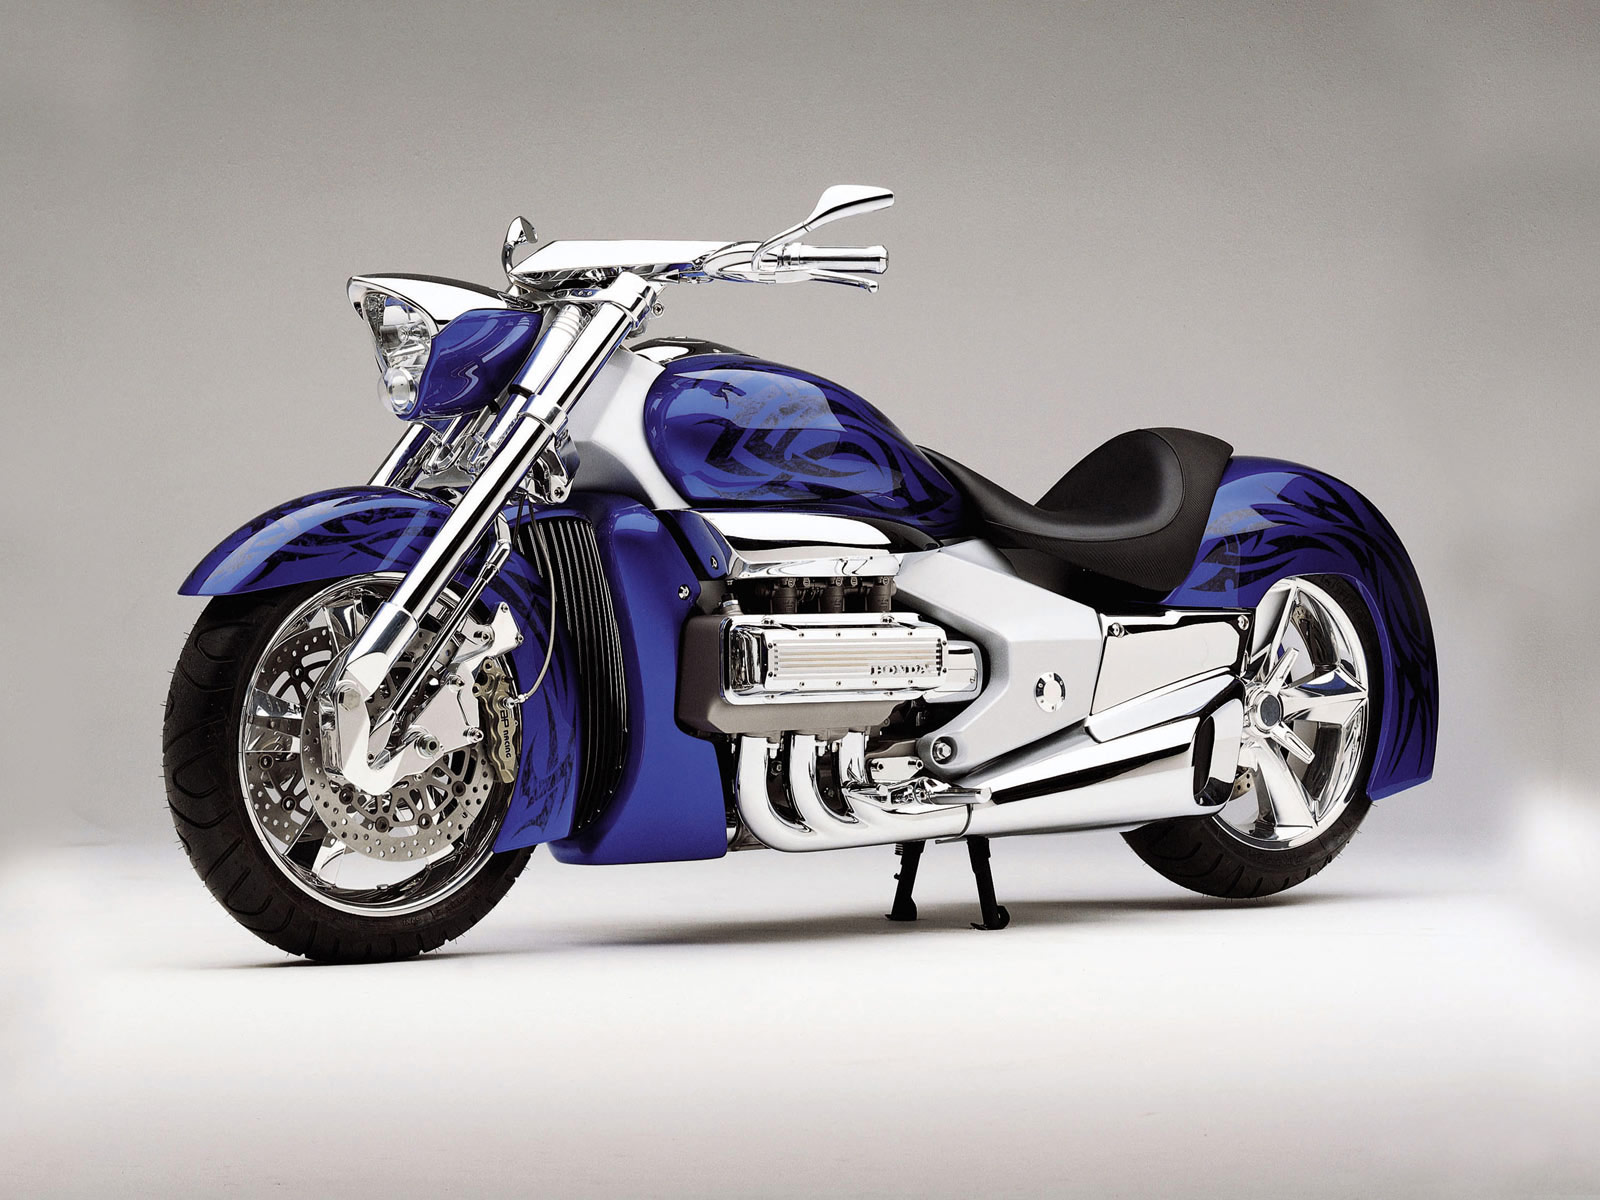 Cling on for dear life !!!: The Honda NAS Motorbike Concept